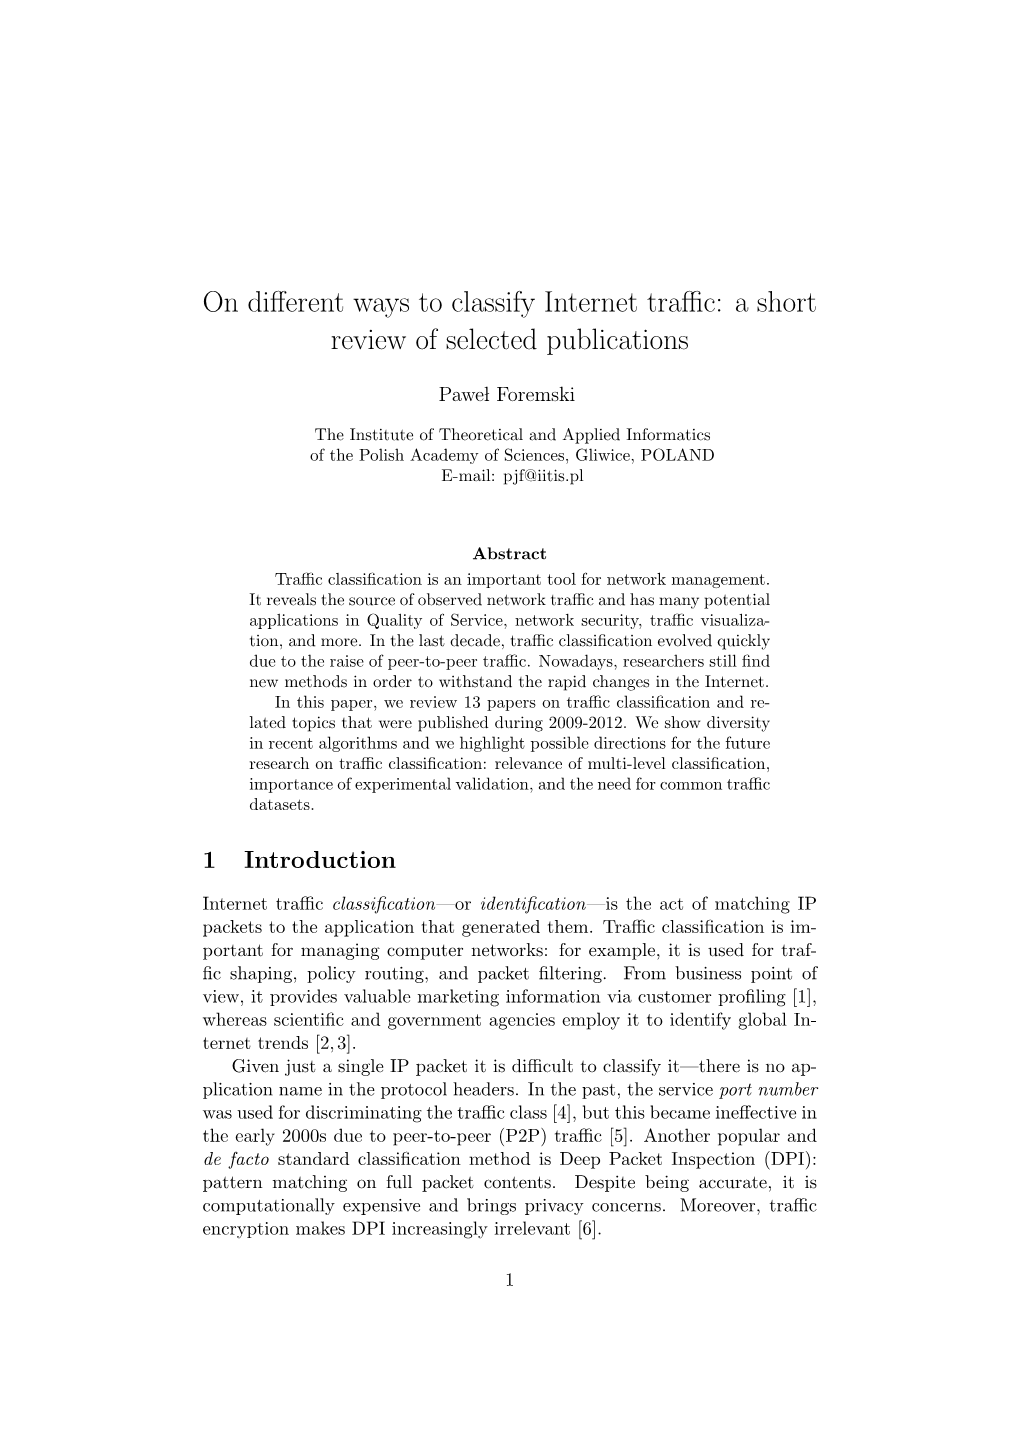 On Different Ways to Classify Internet Traffic: a Short Review of Selected